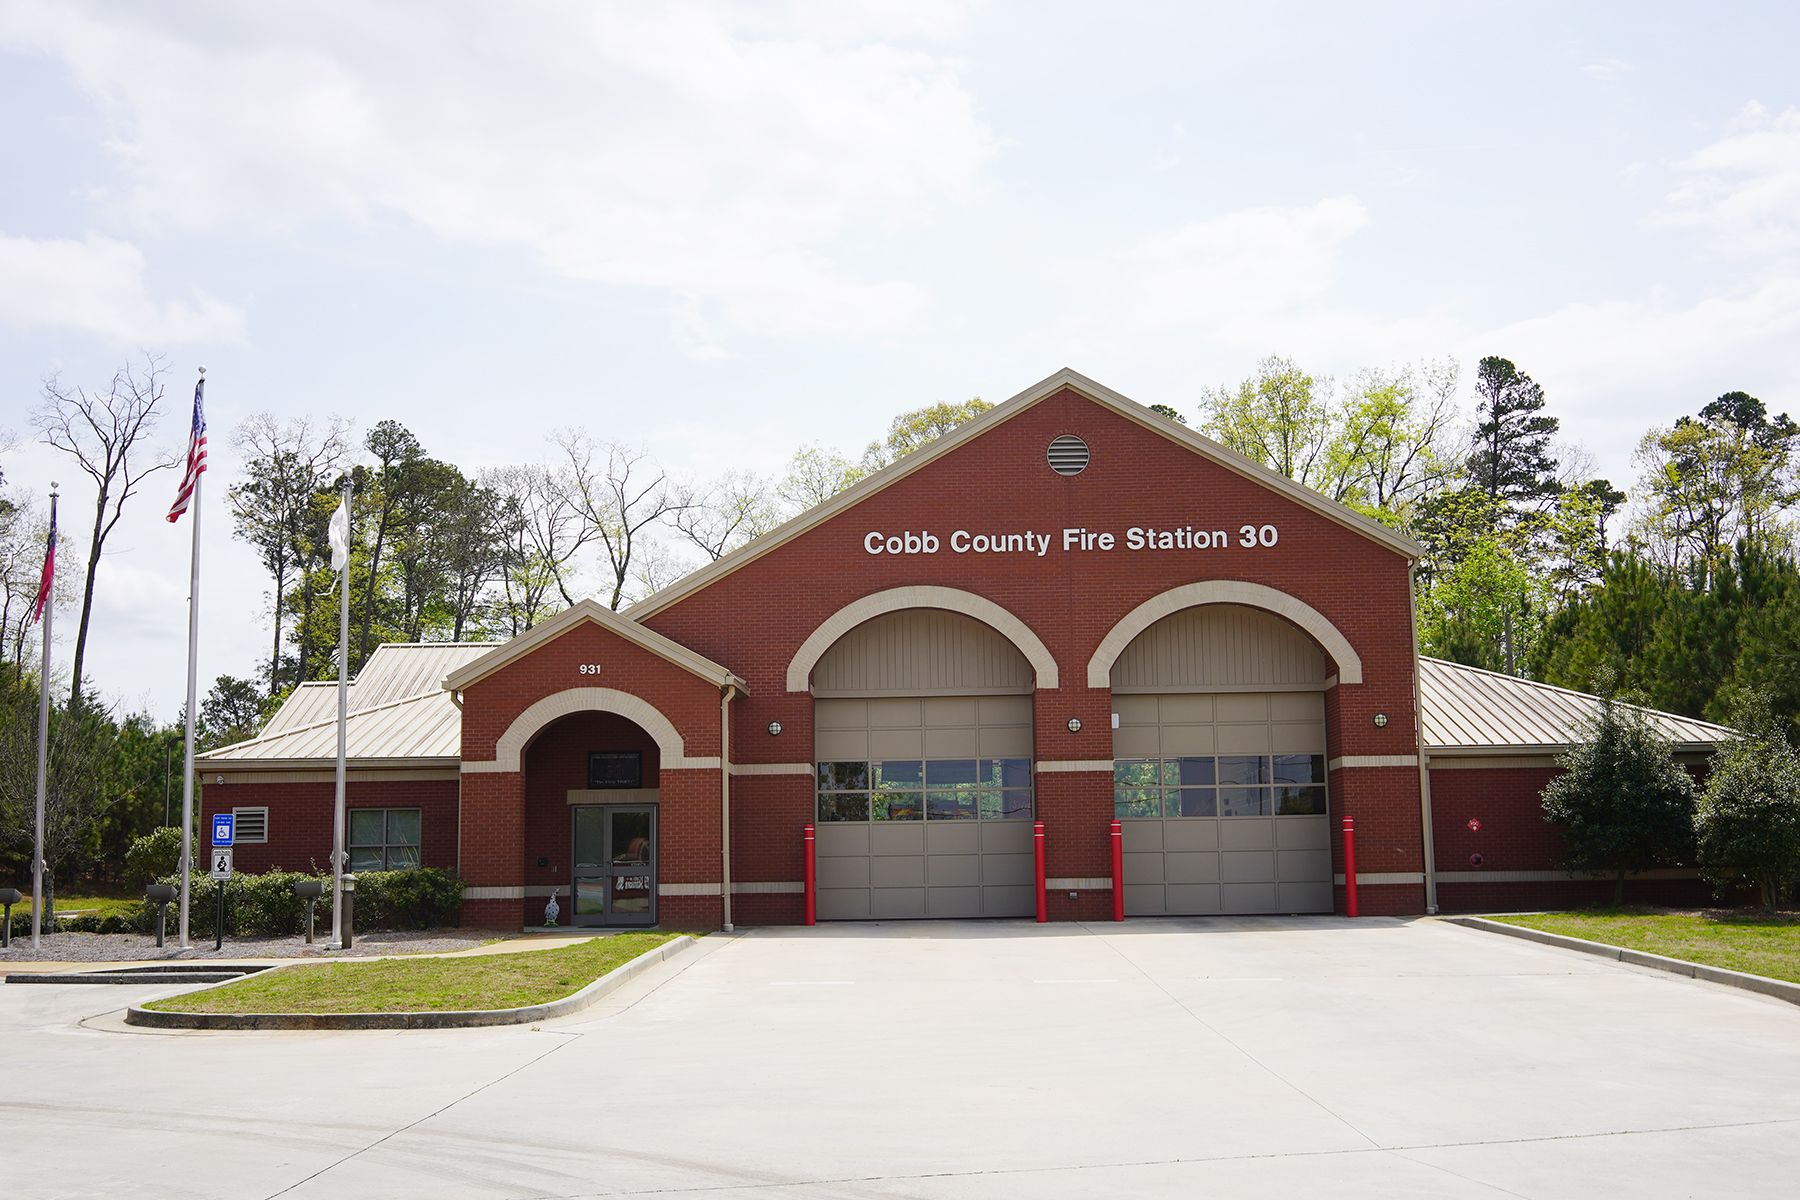 Outside of Fire Station 30